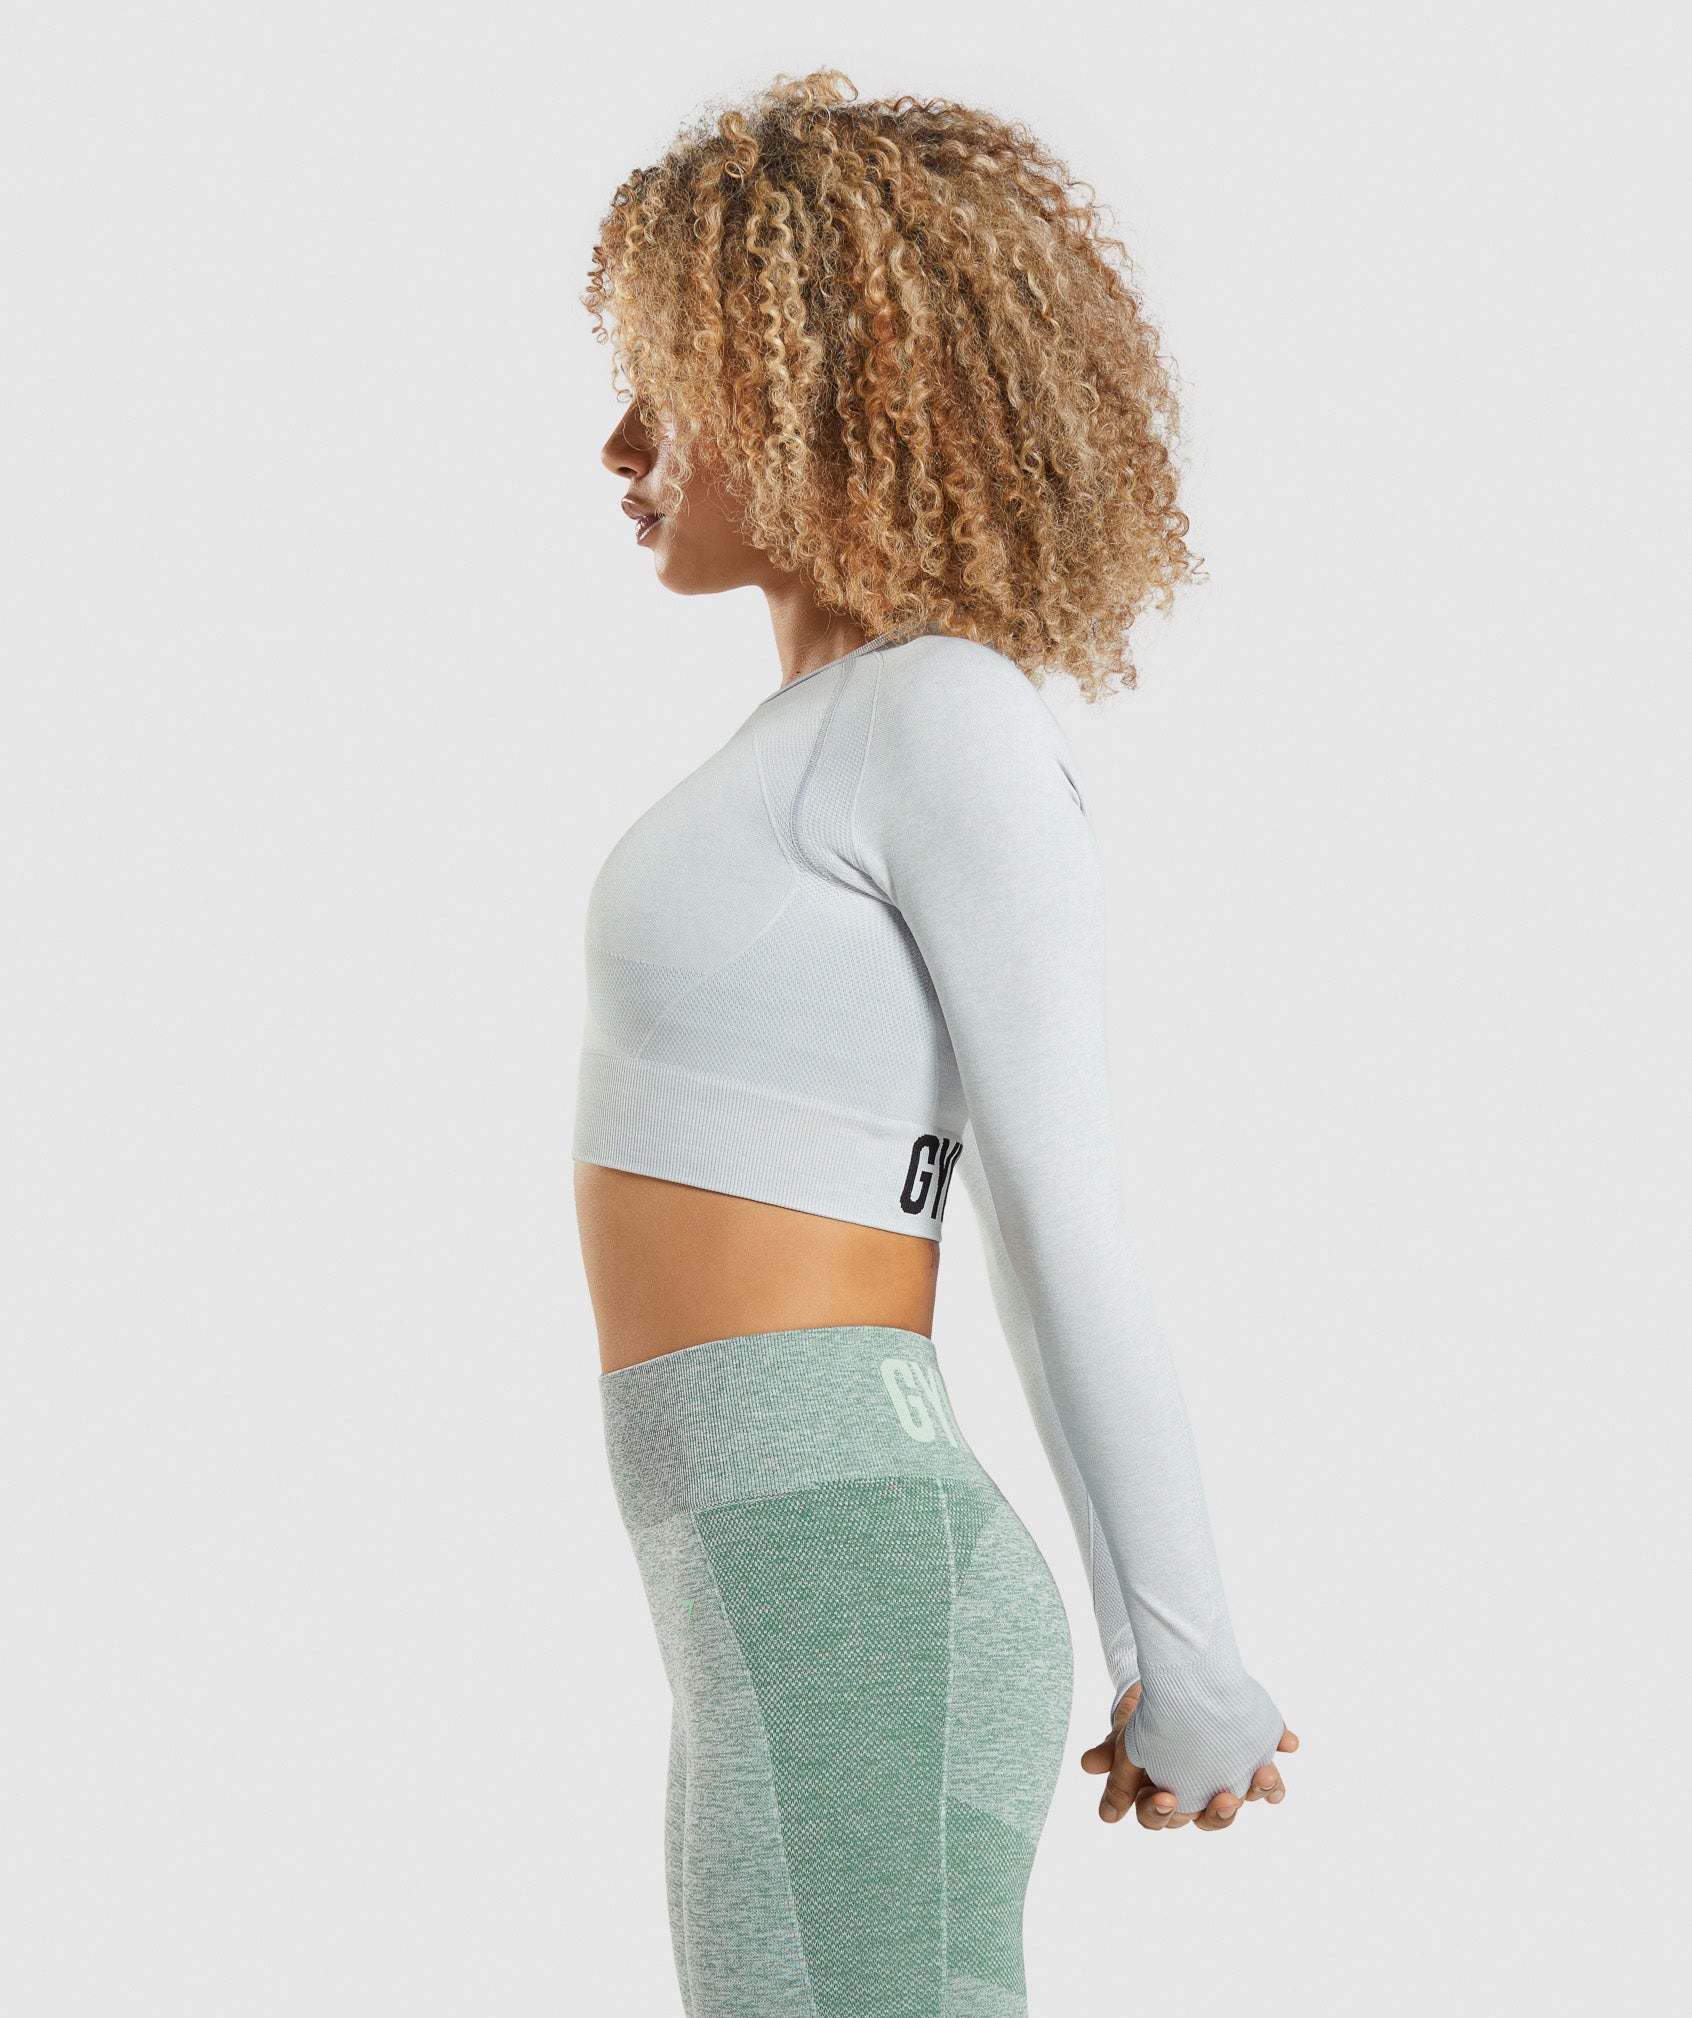 Sporty Outfits – Gymshark Vital Seamless Long Sleeve Crop Top